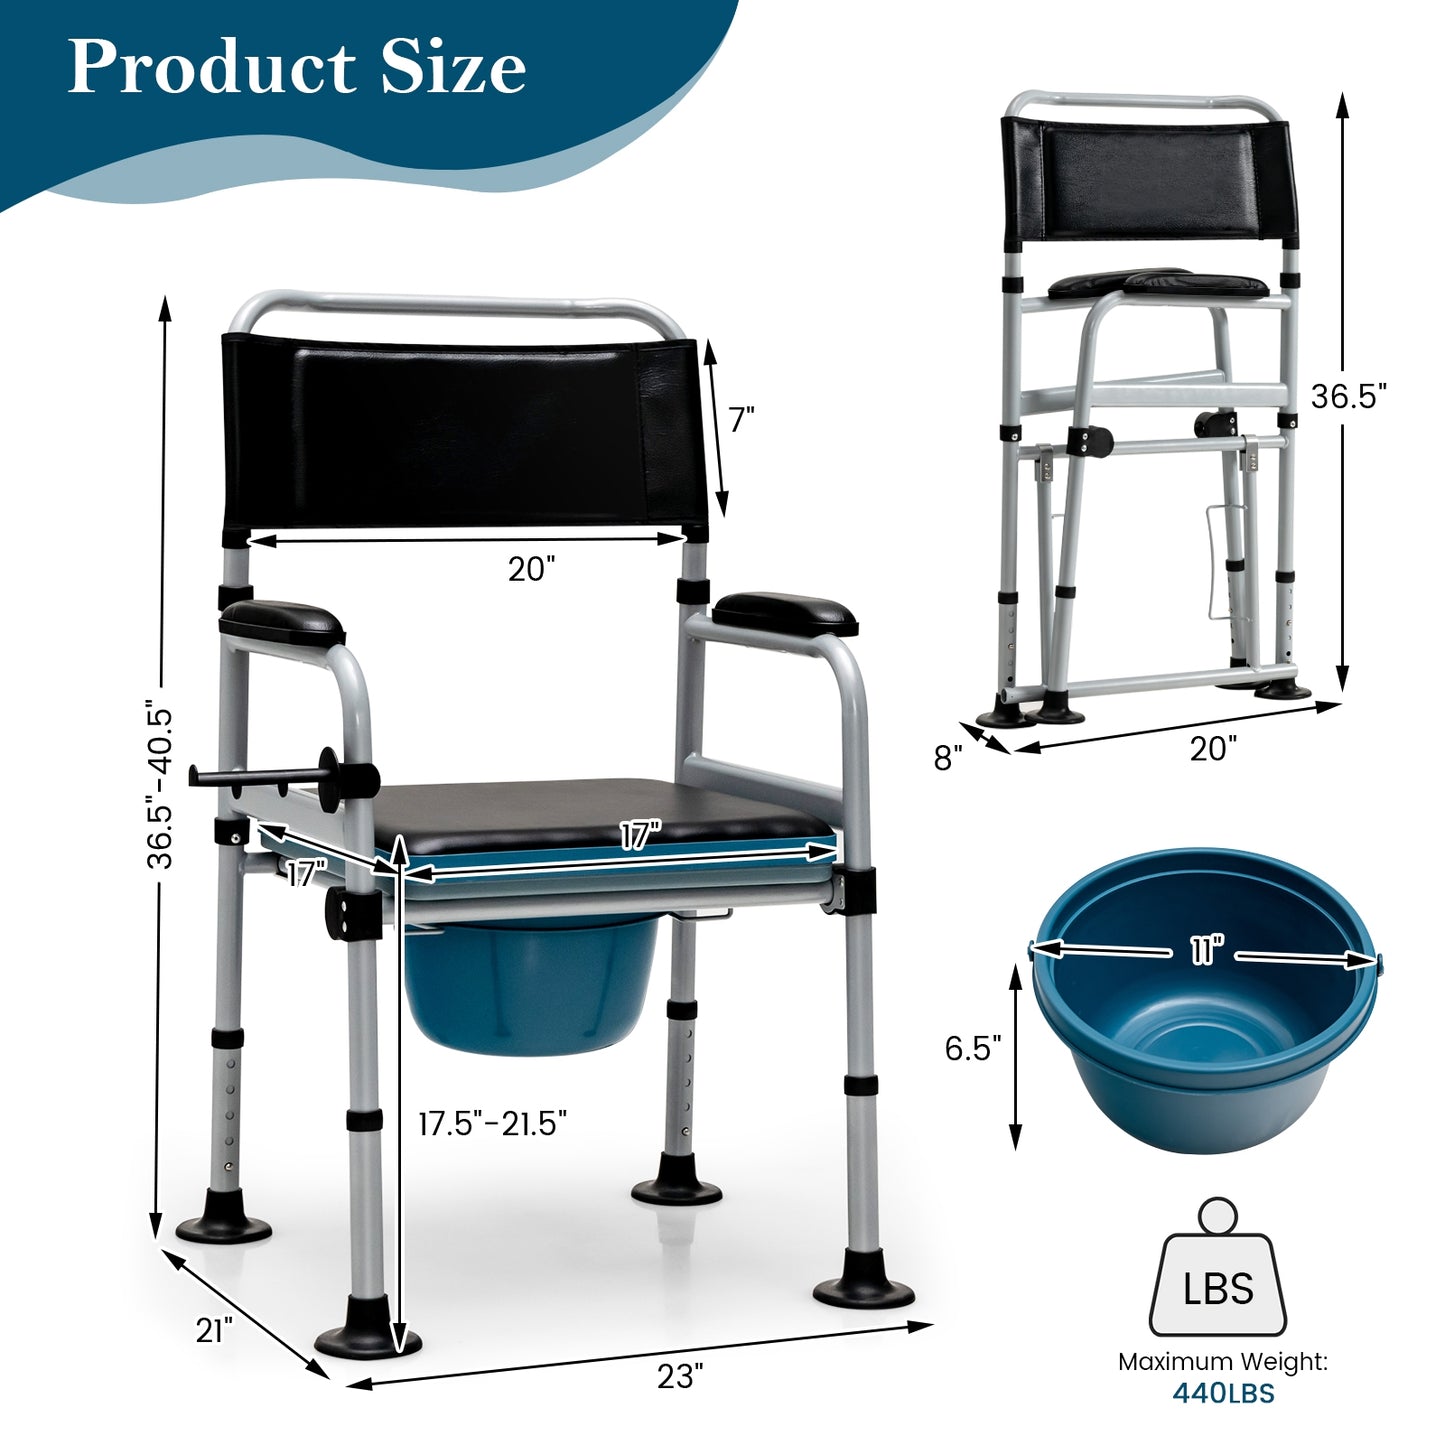 4-in-1 Folding Bedside Commode Chair with Detachable Bucket and Towel Holder